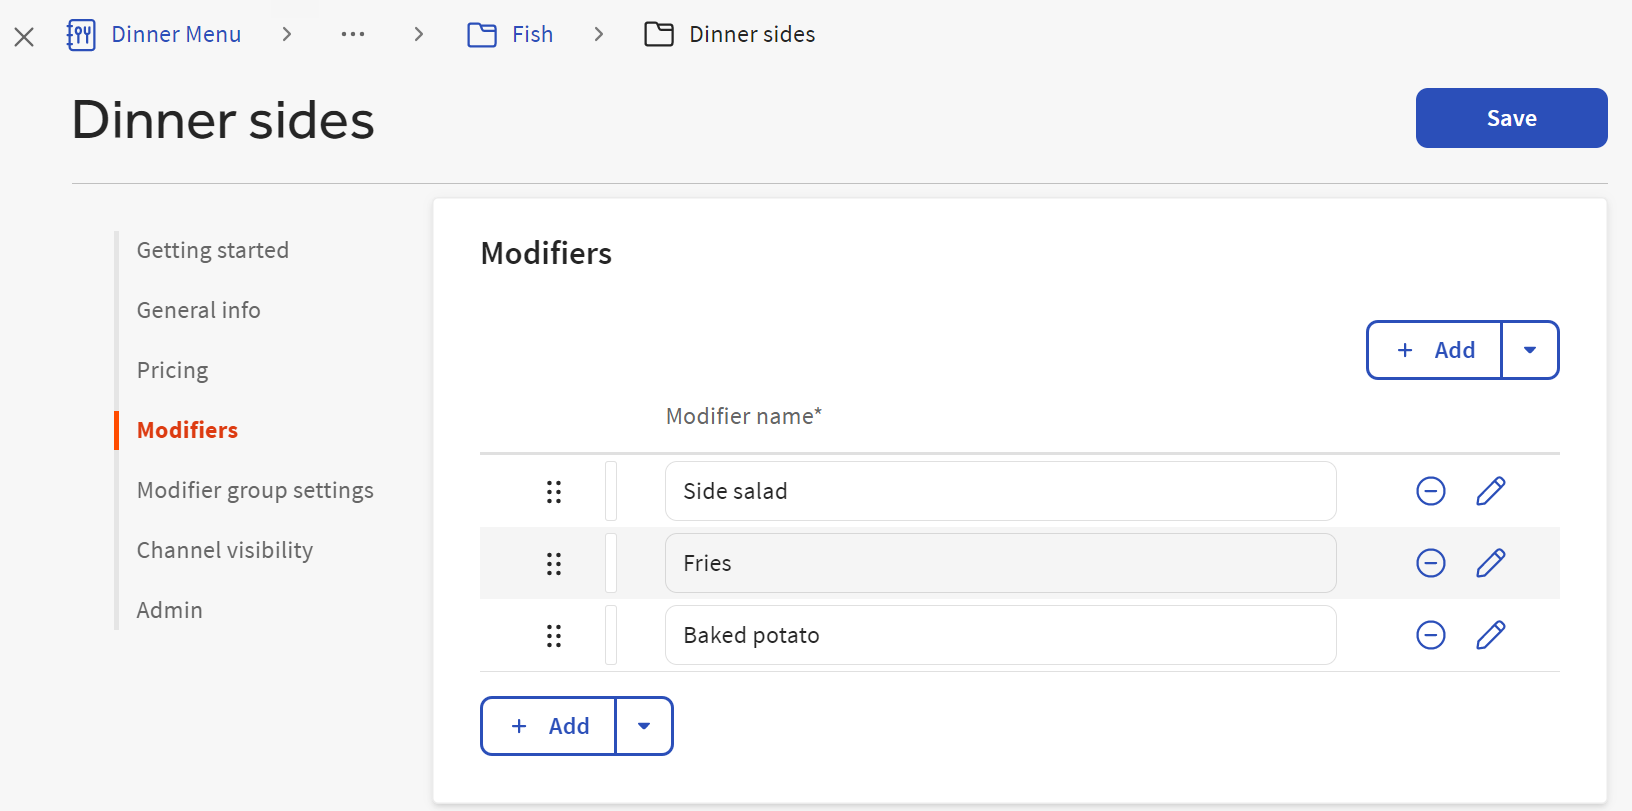 A modifier group details page with the Modifiers section displayed.